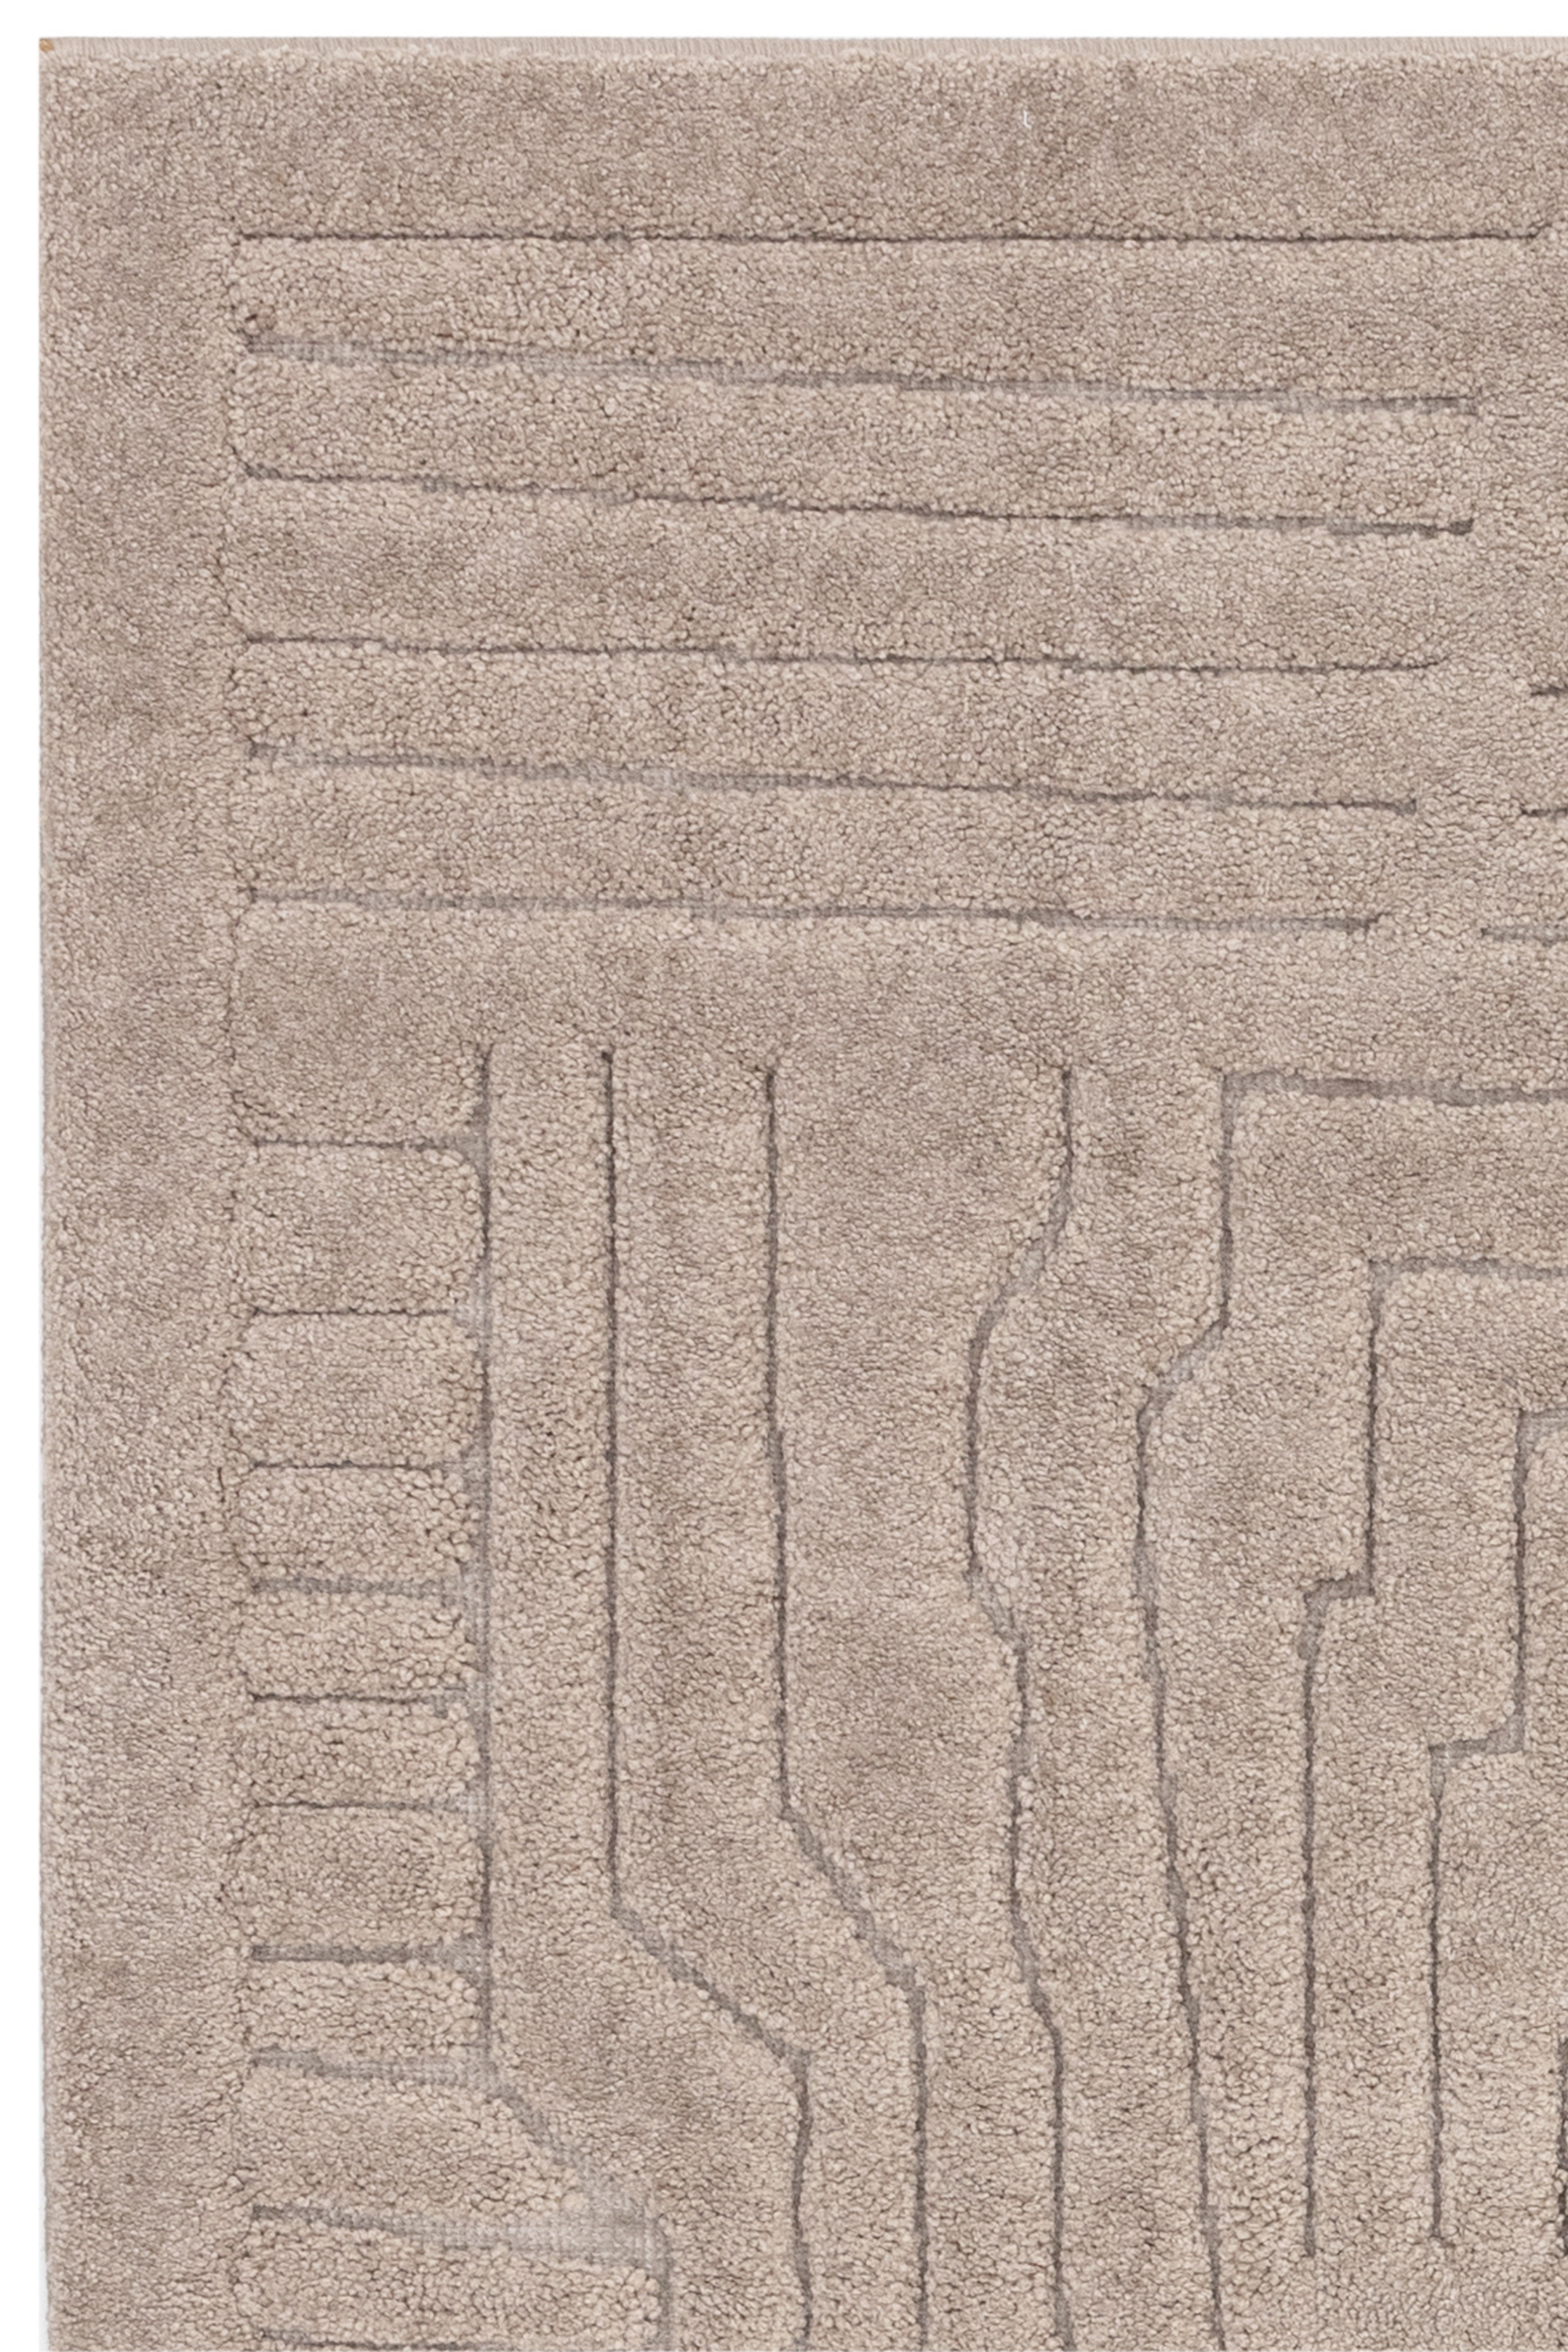 Beige rug with high-low pile and minimal geometric pattern 